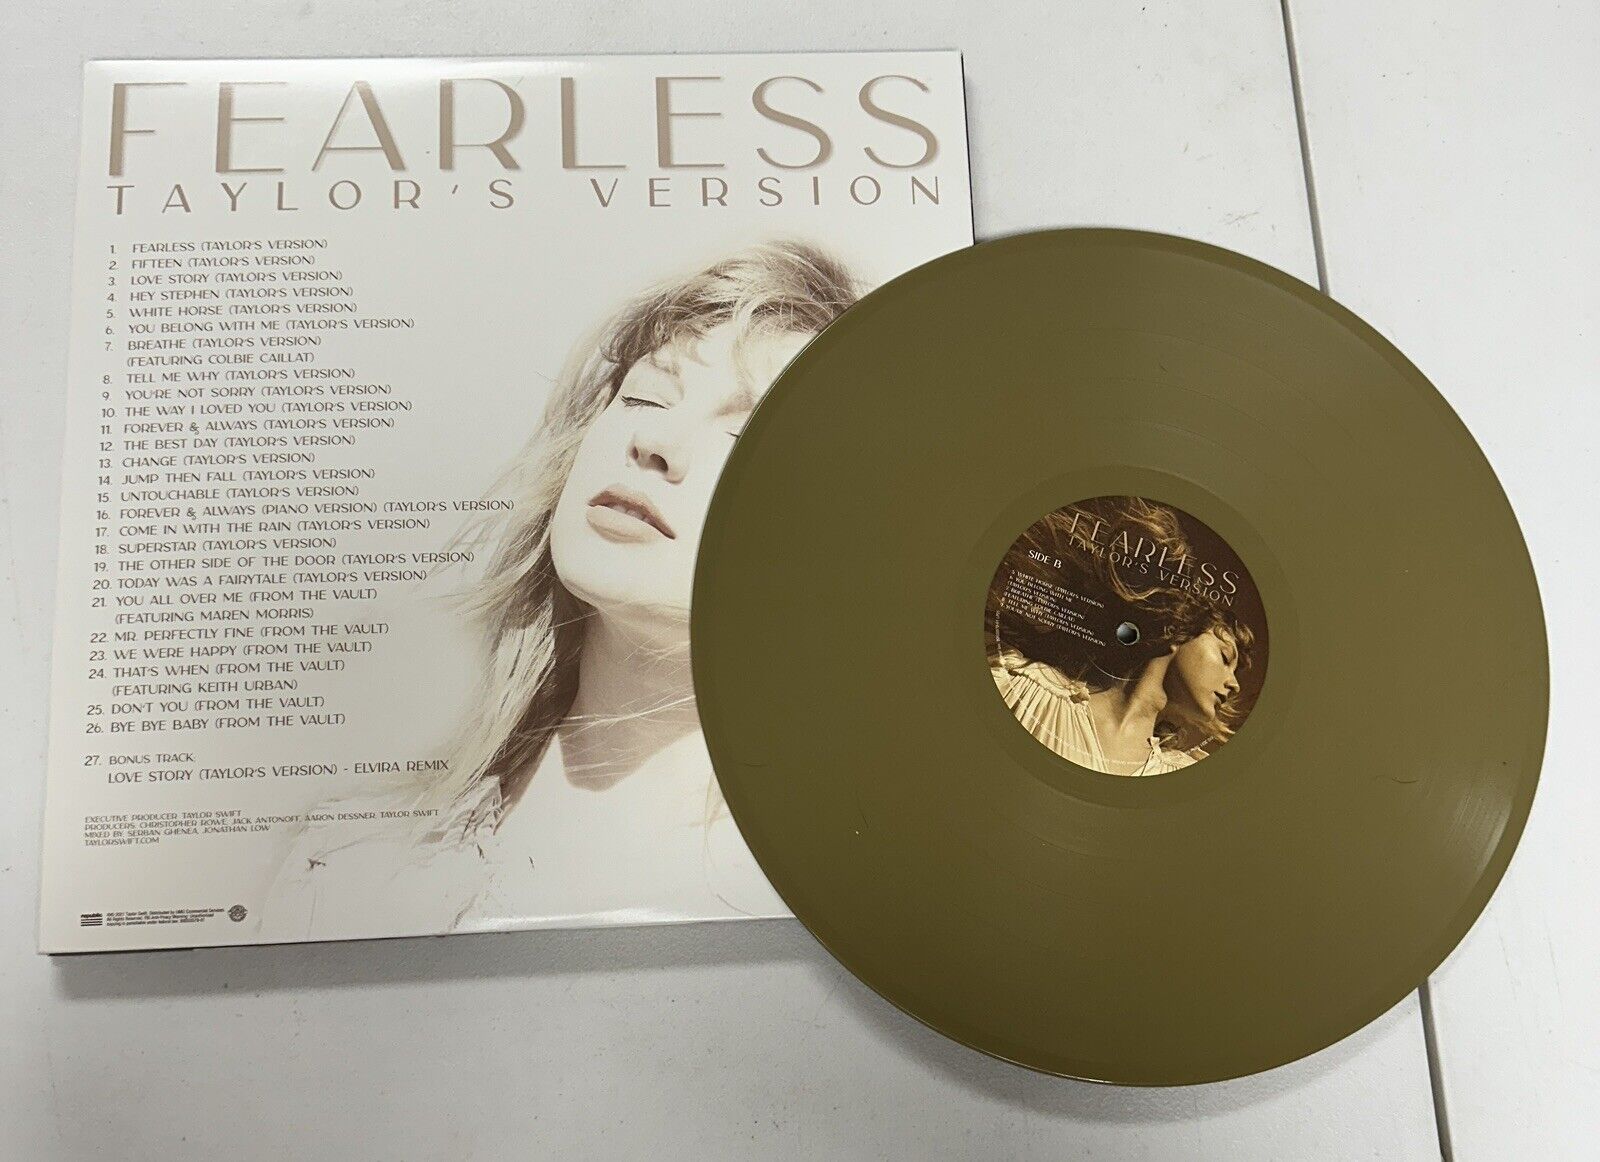 Fearless (Taylor's Version) by Taylor Swift (Record, 2021)